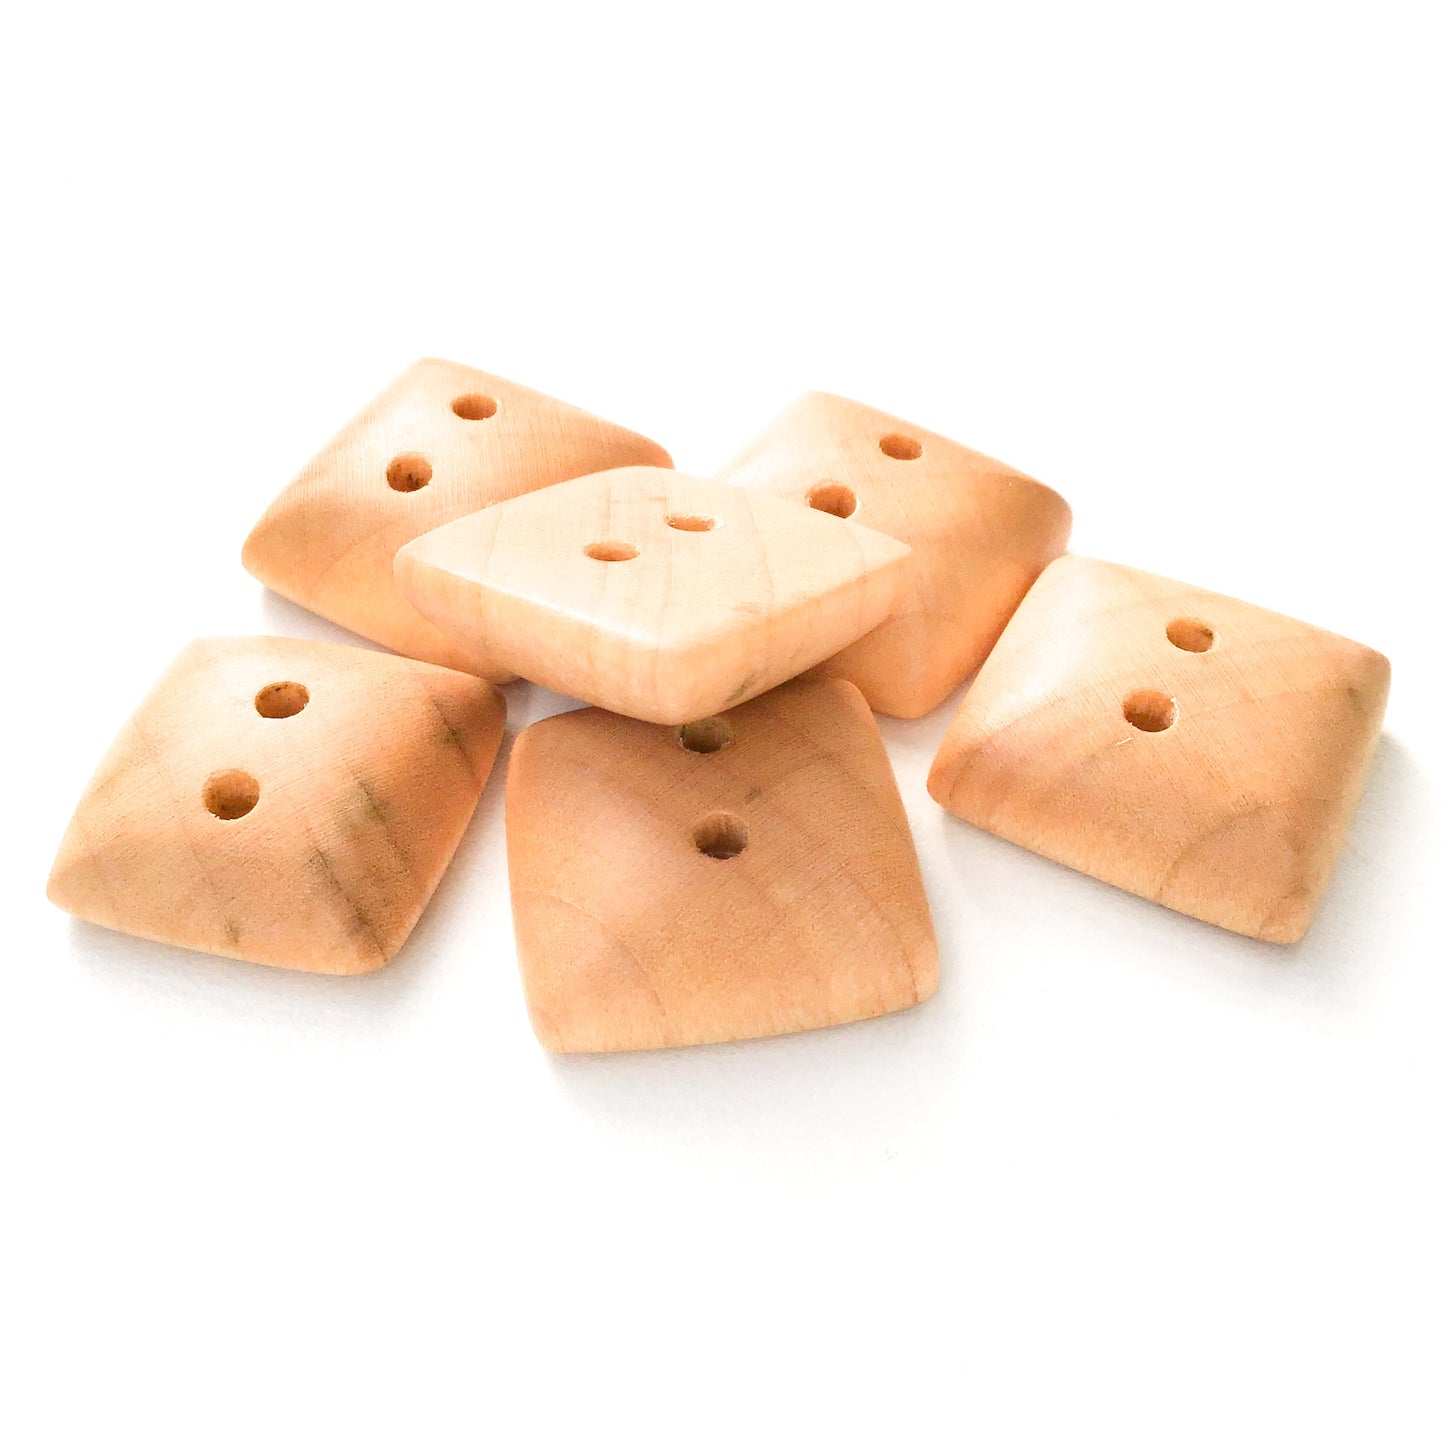 Lightly Spalted Maple Wood Buttons - Square Maple Wood Buttons - 7/8" - 6 Pack